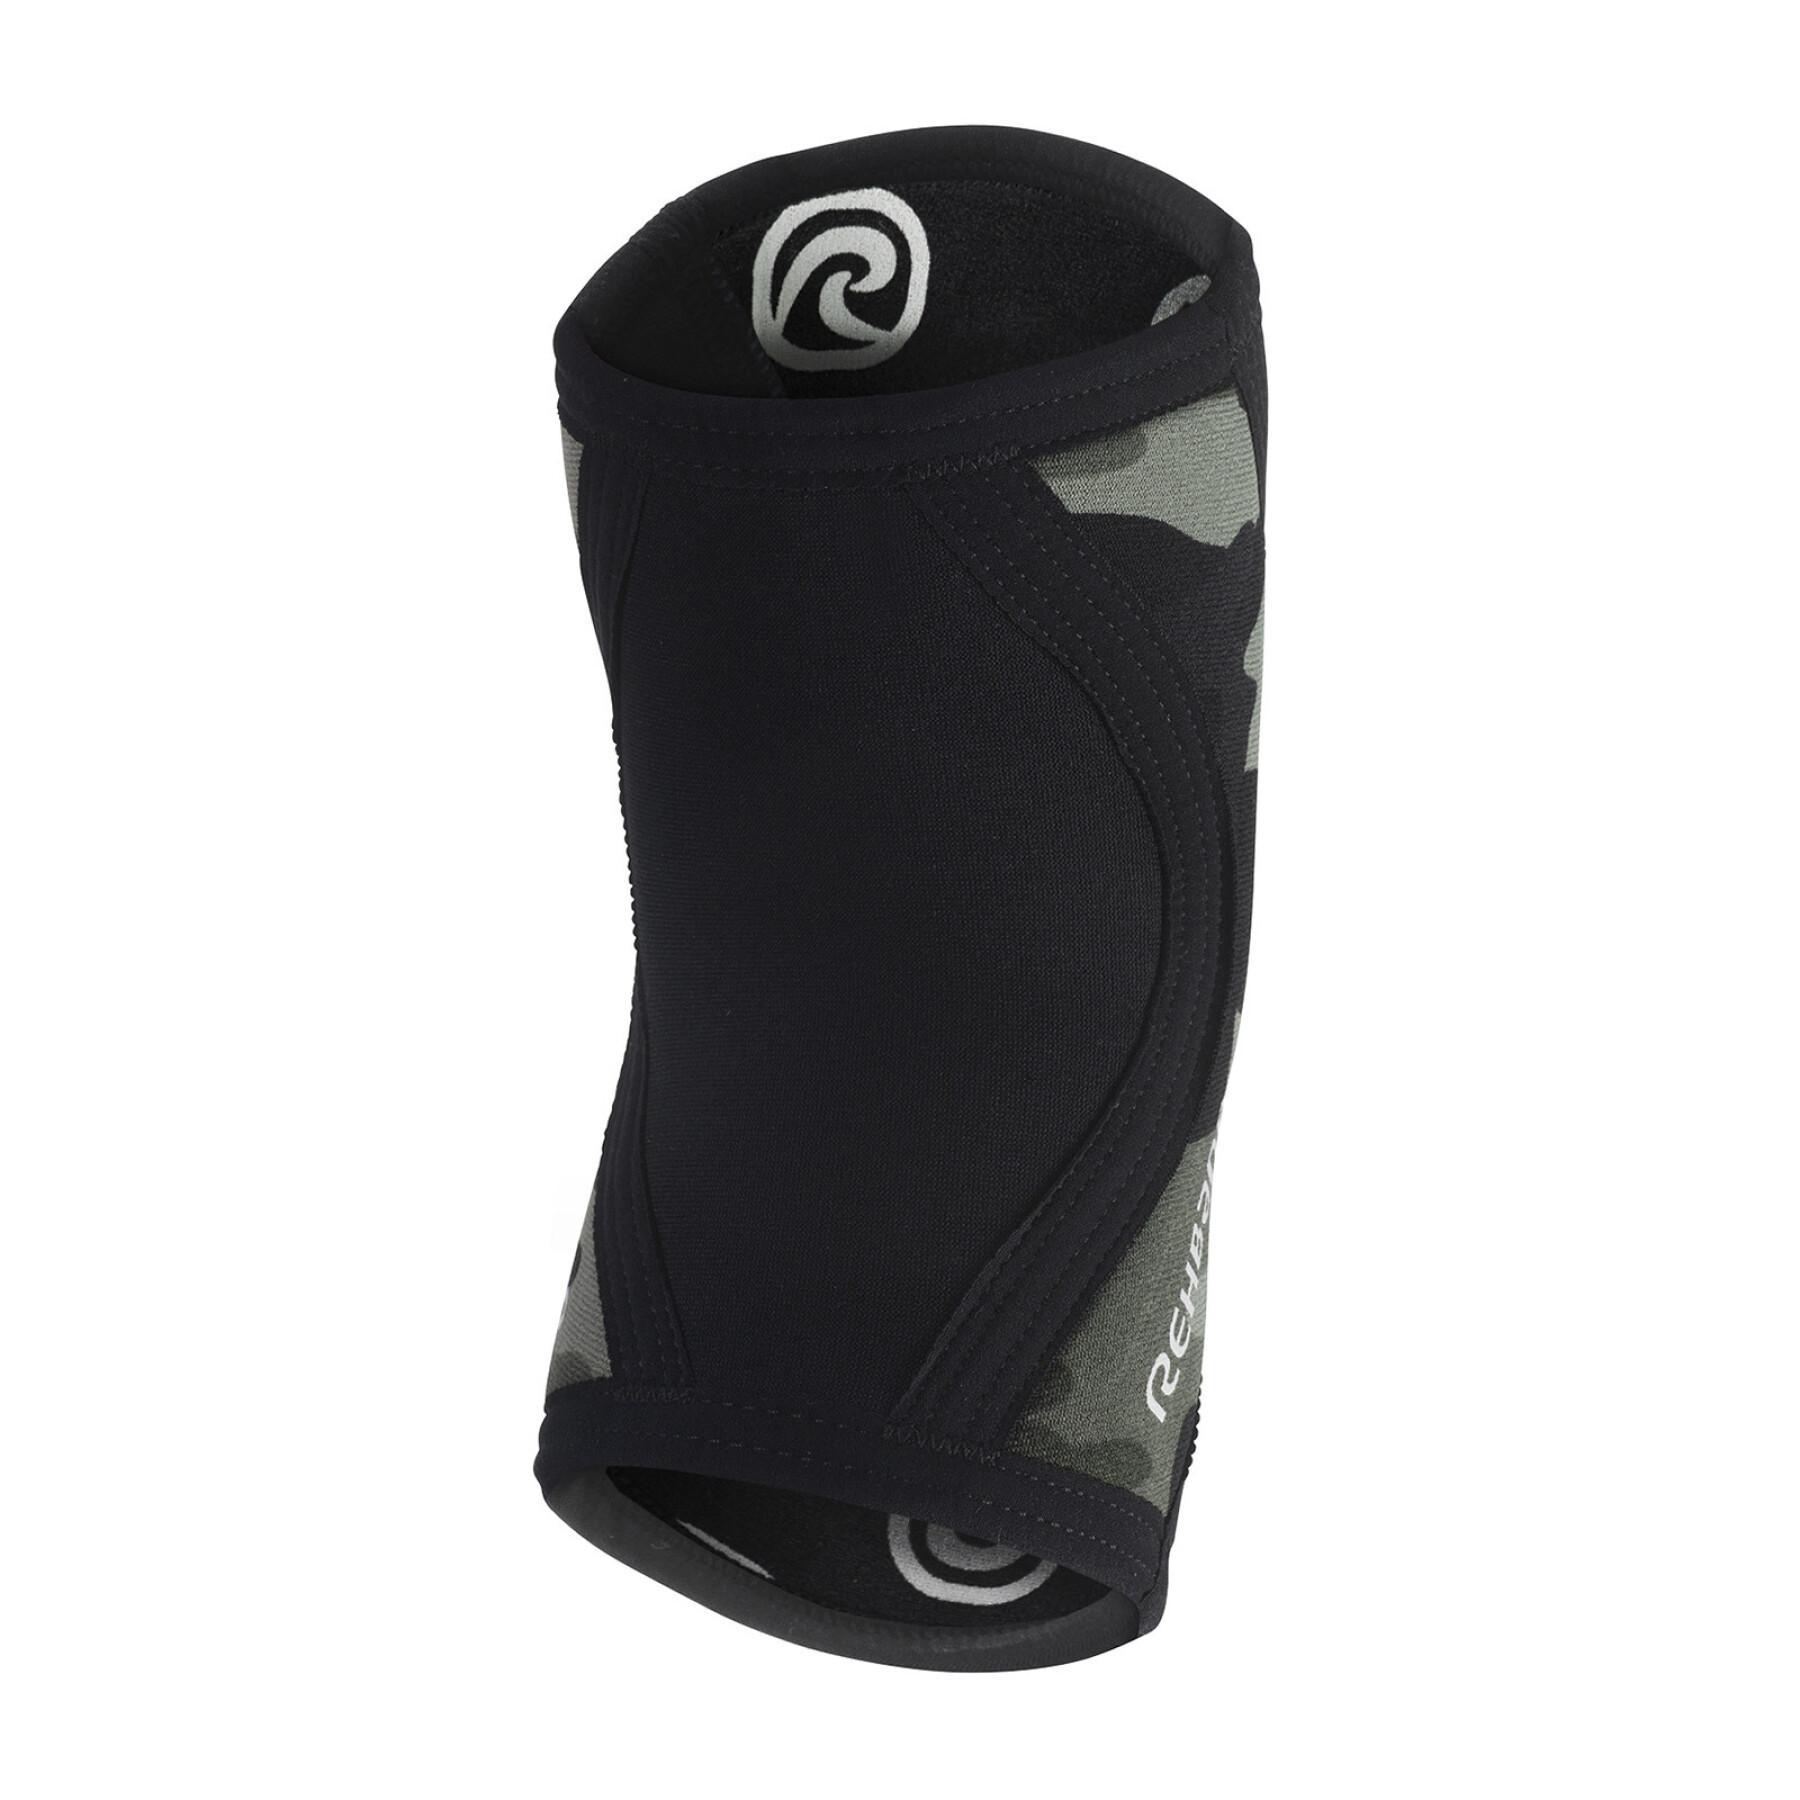 Elbow pads Rehband RX